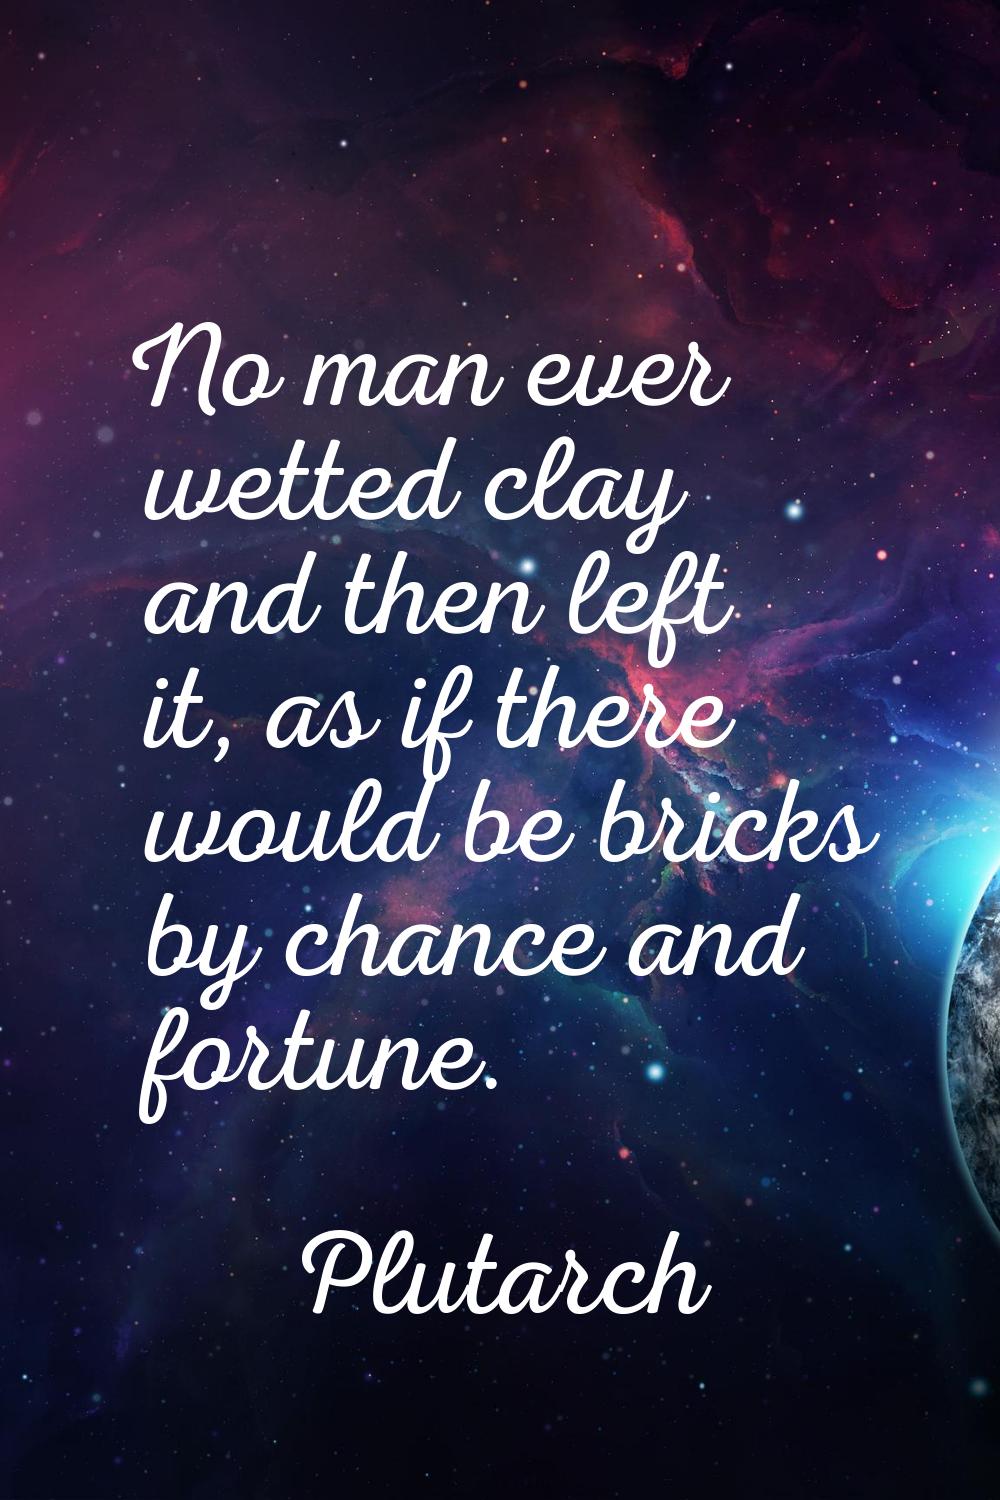 No man ever wetted clay and then left it, as if there would be bricks by chance and fortune.